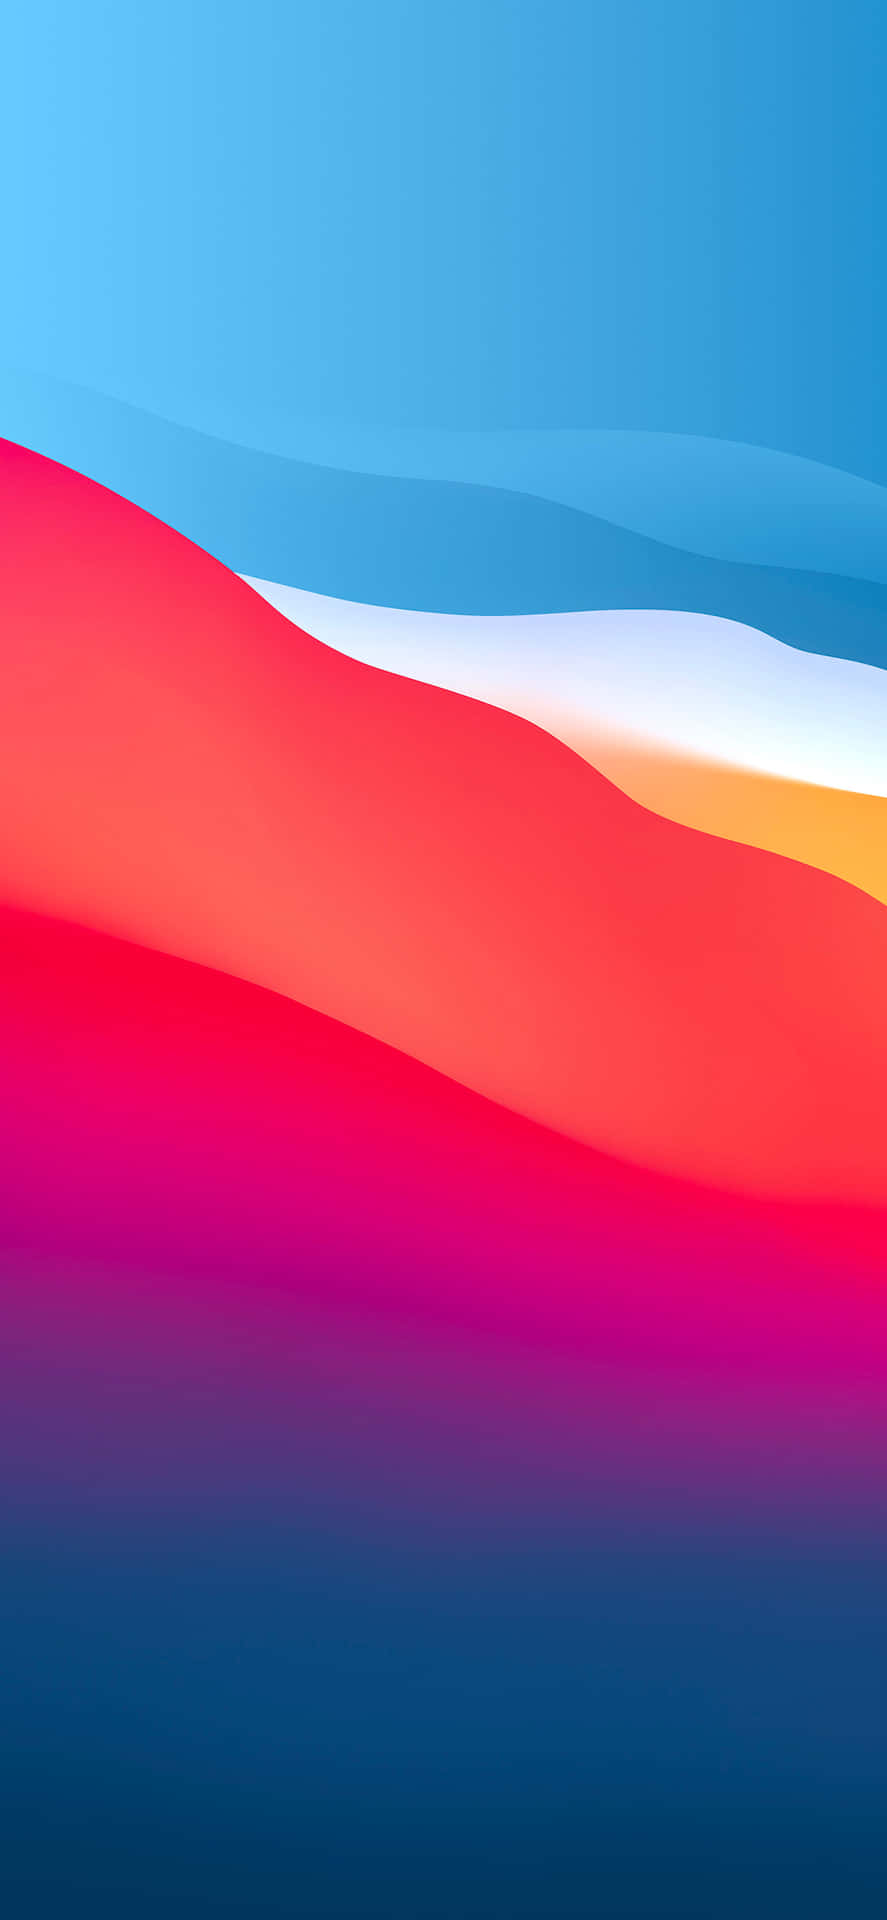 Brighten Up Your Day With A Rainbow Iphone Background